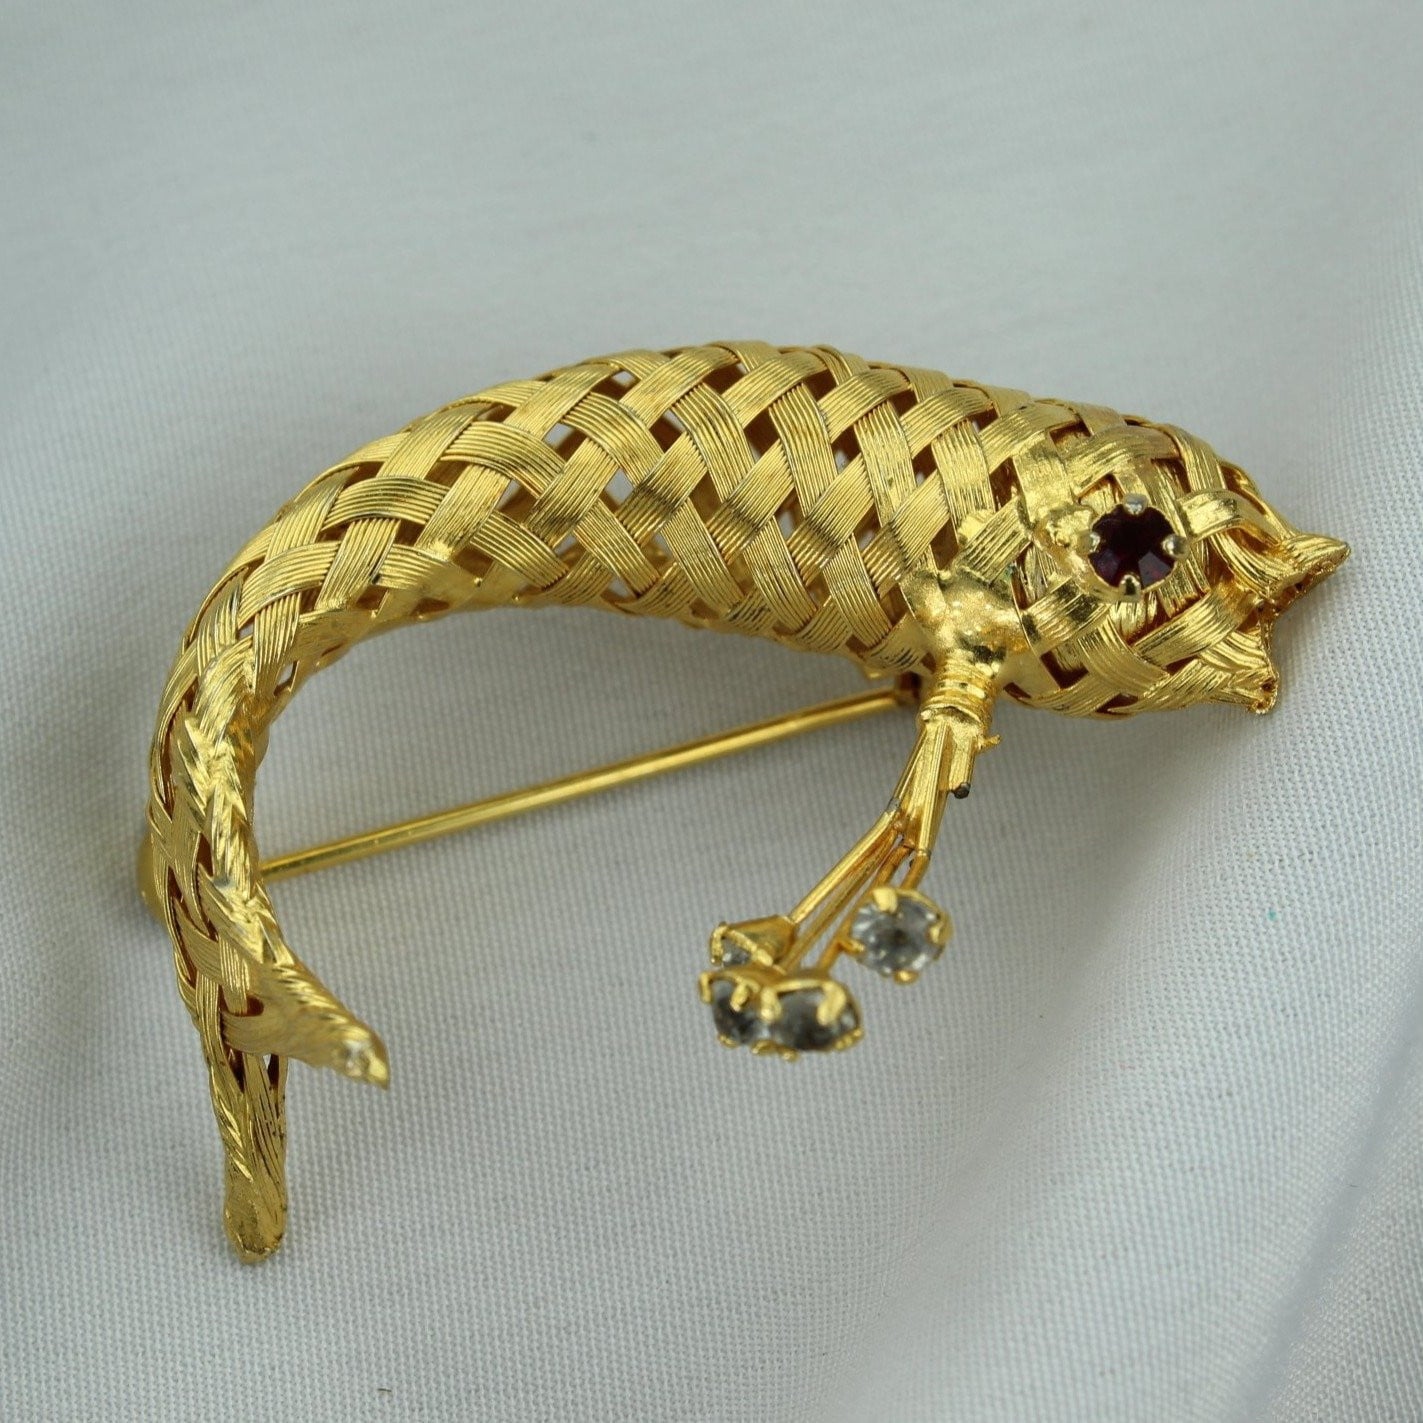 Vintage Fish Pin Woven Gold Tone Rhinestone Eye Fin excellent